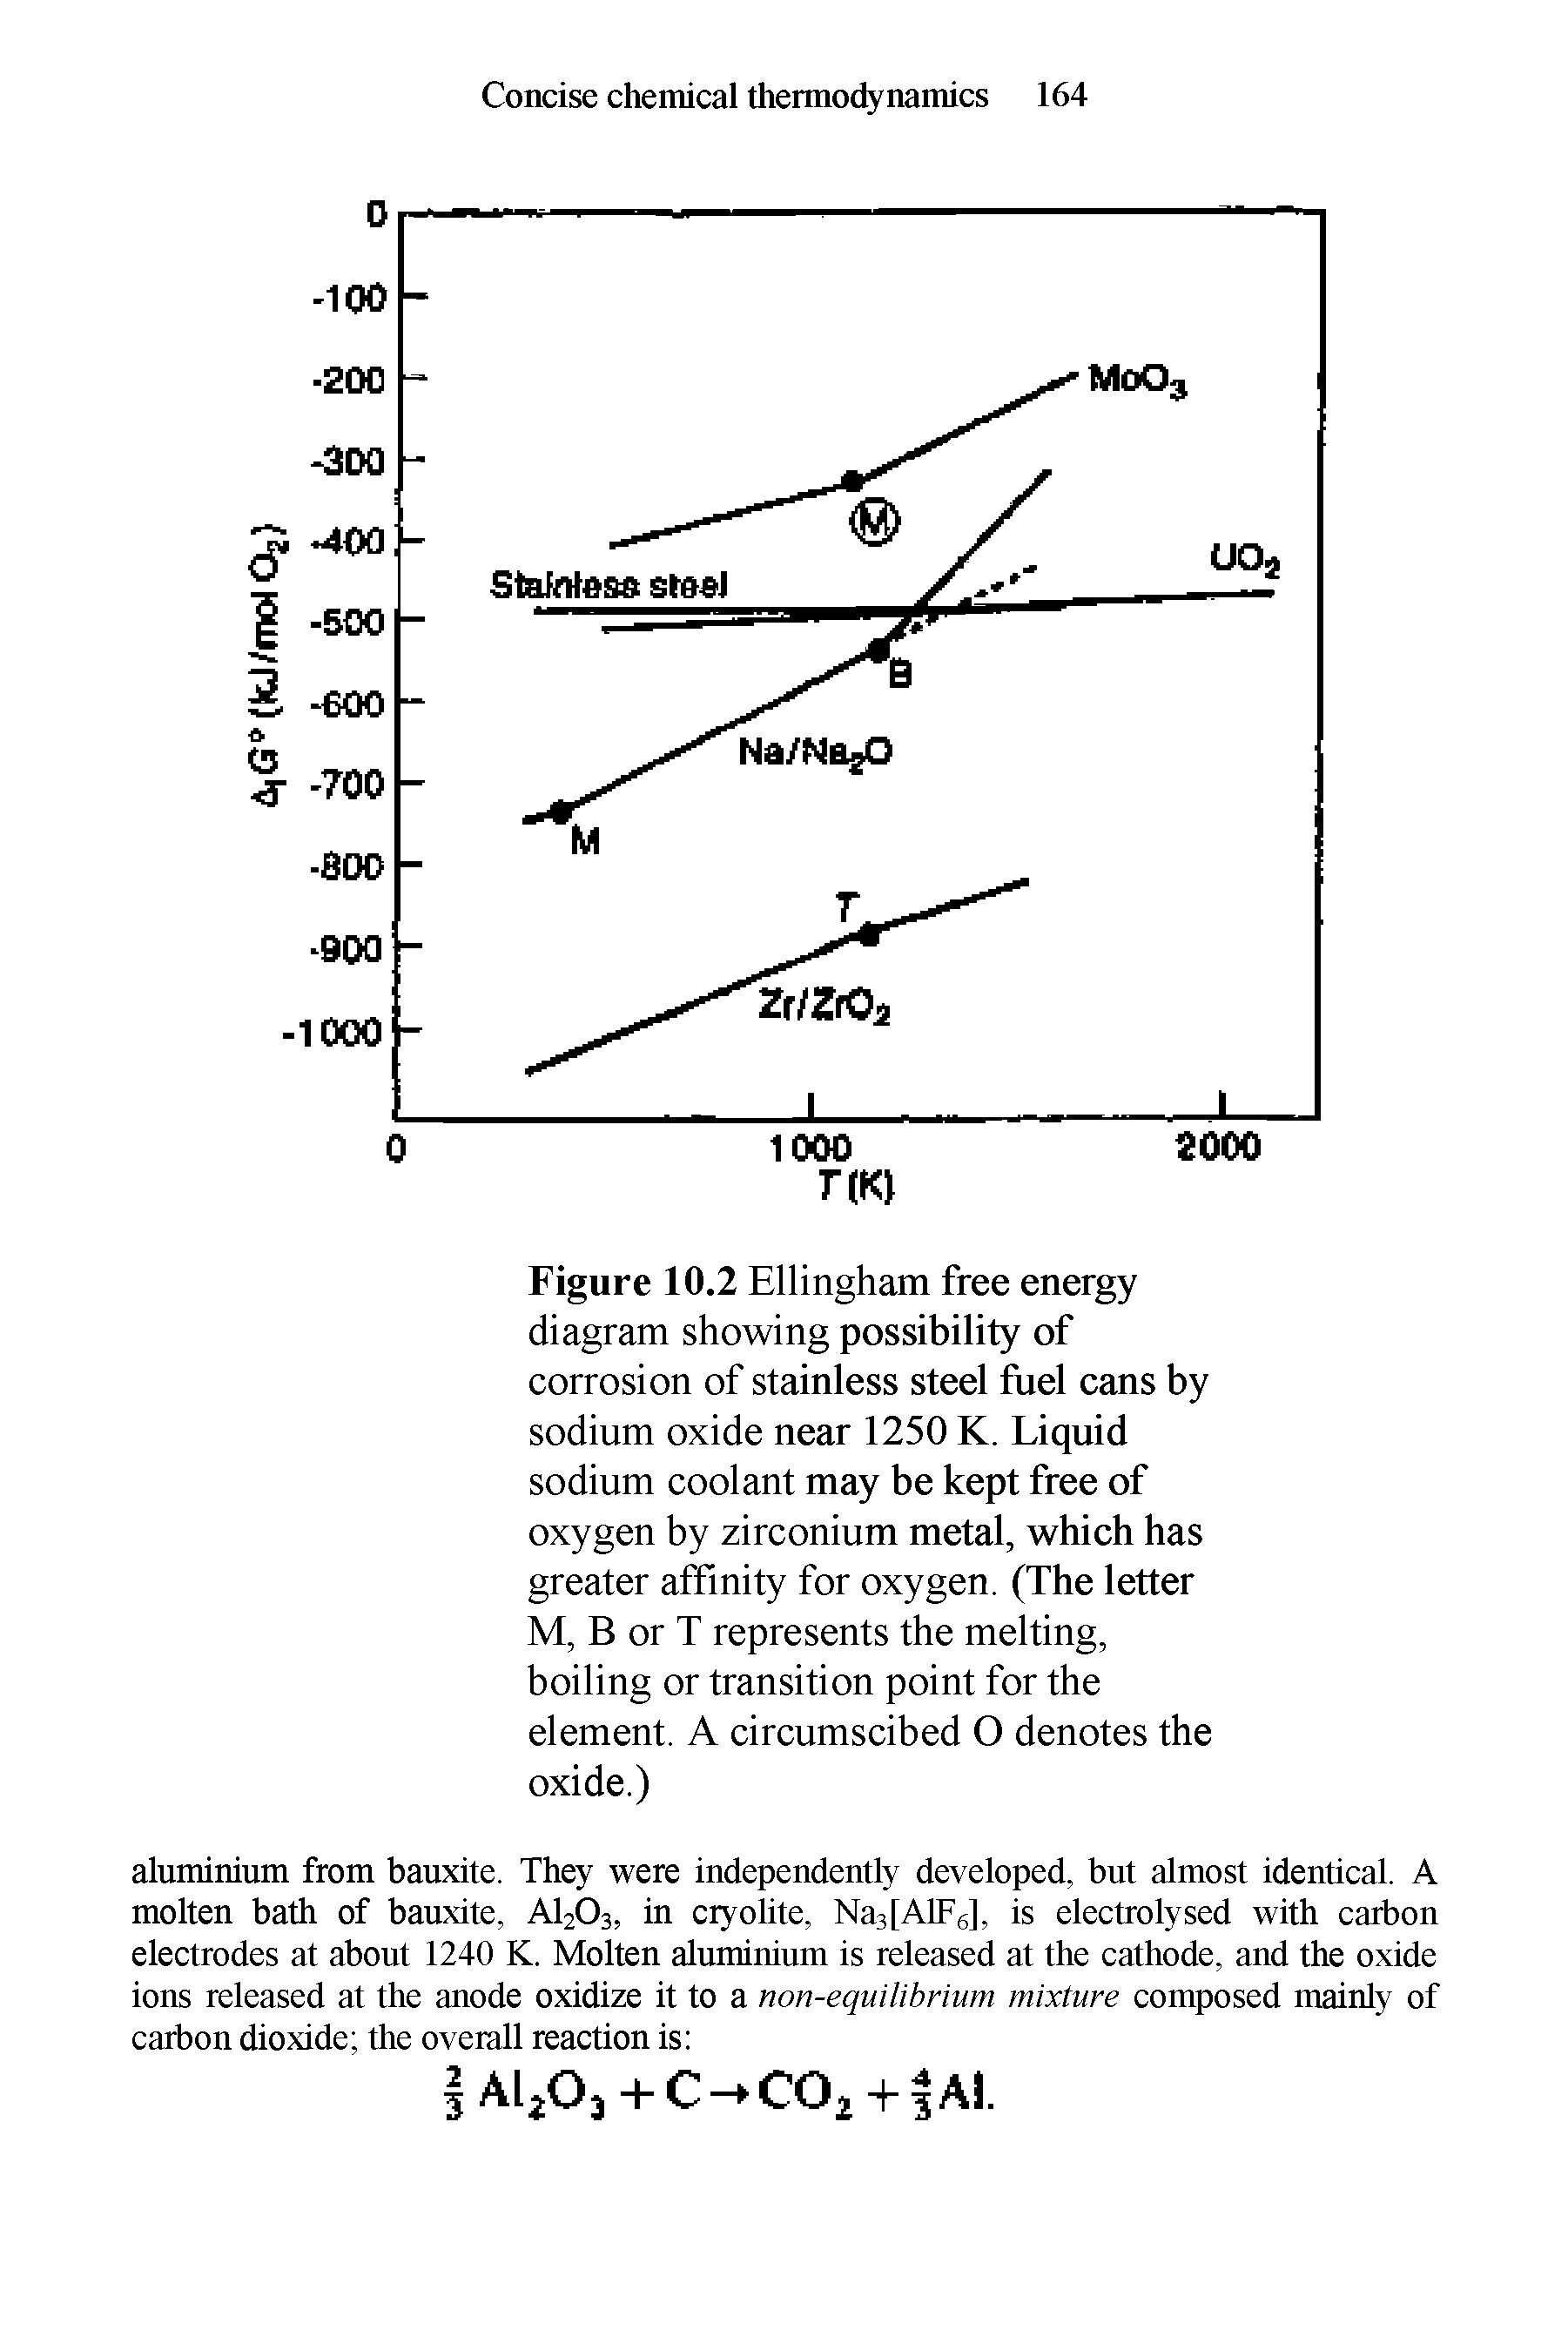 Figure 10.2 Ellingham free energy diagram showing possibility of corrosion of stainless steel fuel cans by sodium oxide near 1250 K. Liquid sodium coolant may be kept free of oxygen by zirconium metal, which has greater affinity for oxygen. (The letter M, B or T represents the melting, boiling or transition point for the element. A circumscibed O denotes the oxide.)...